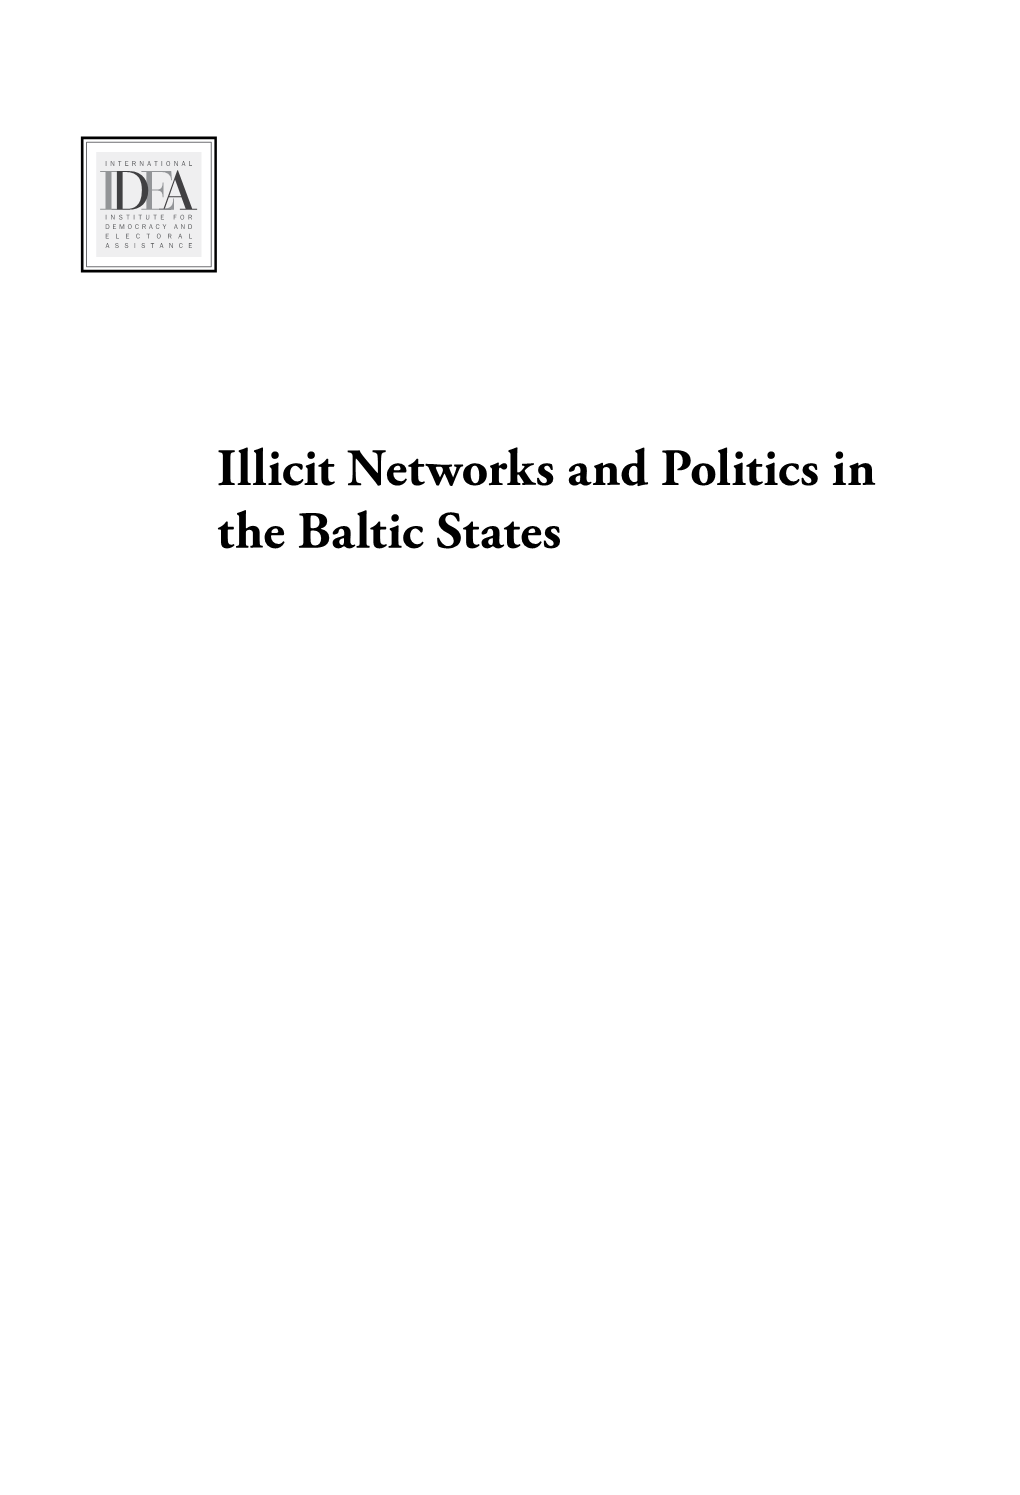 Illicit Networks and Politics in the Baltic States International IDEA